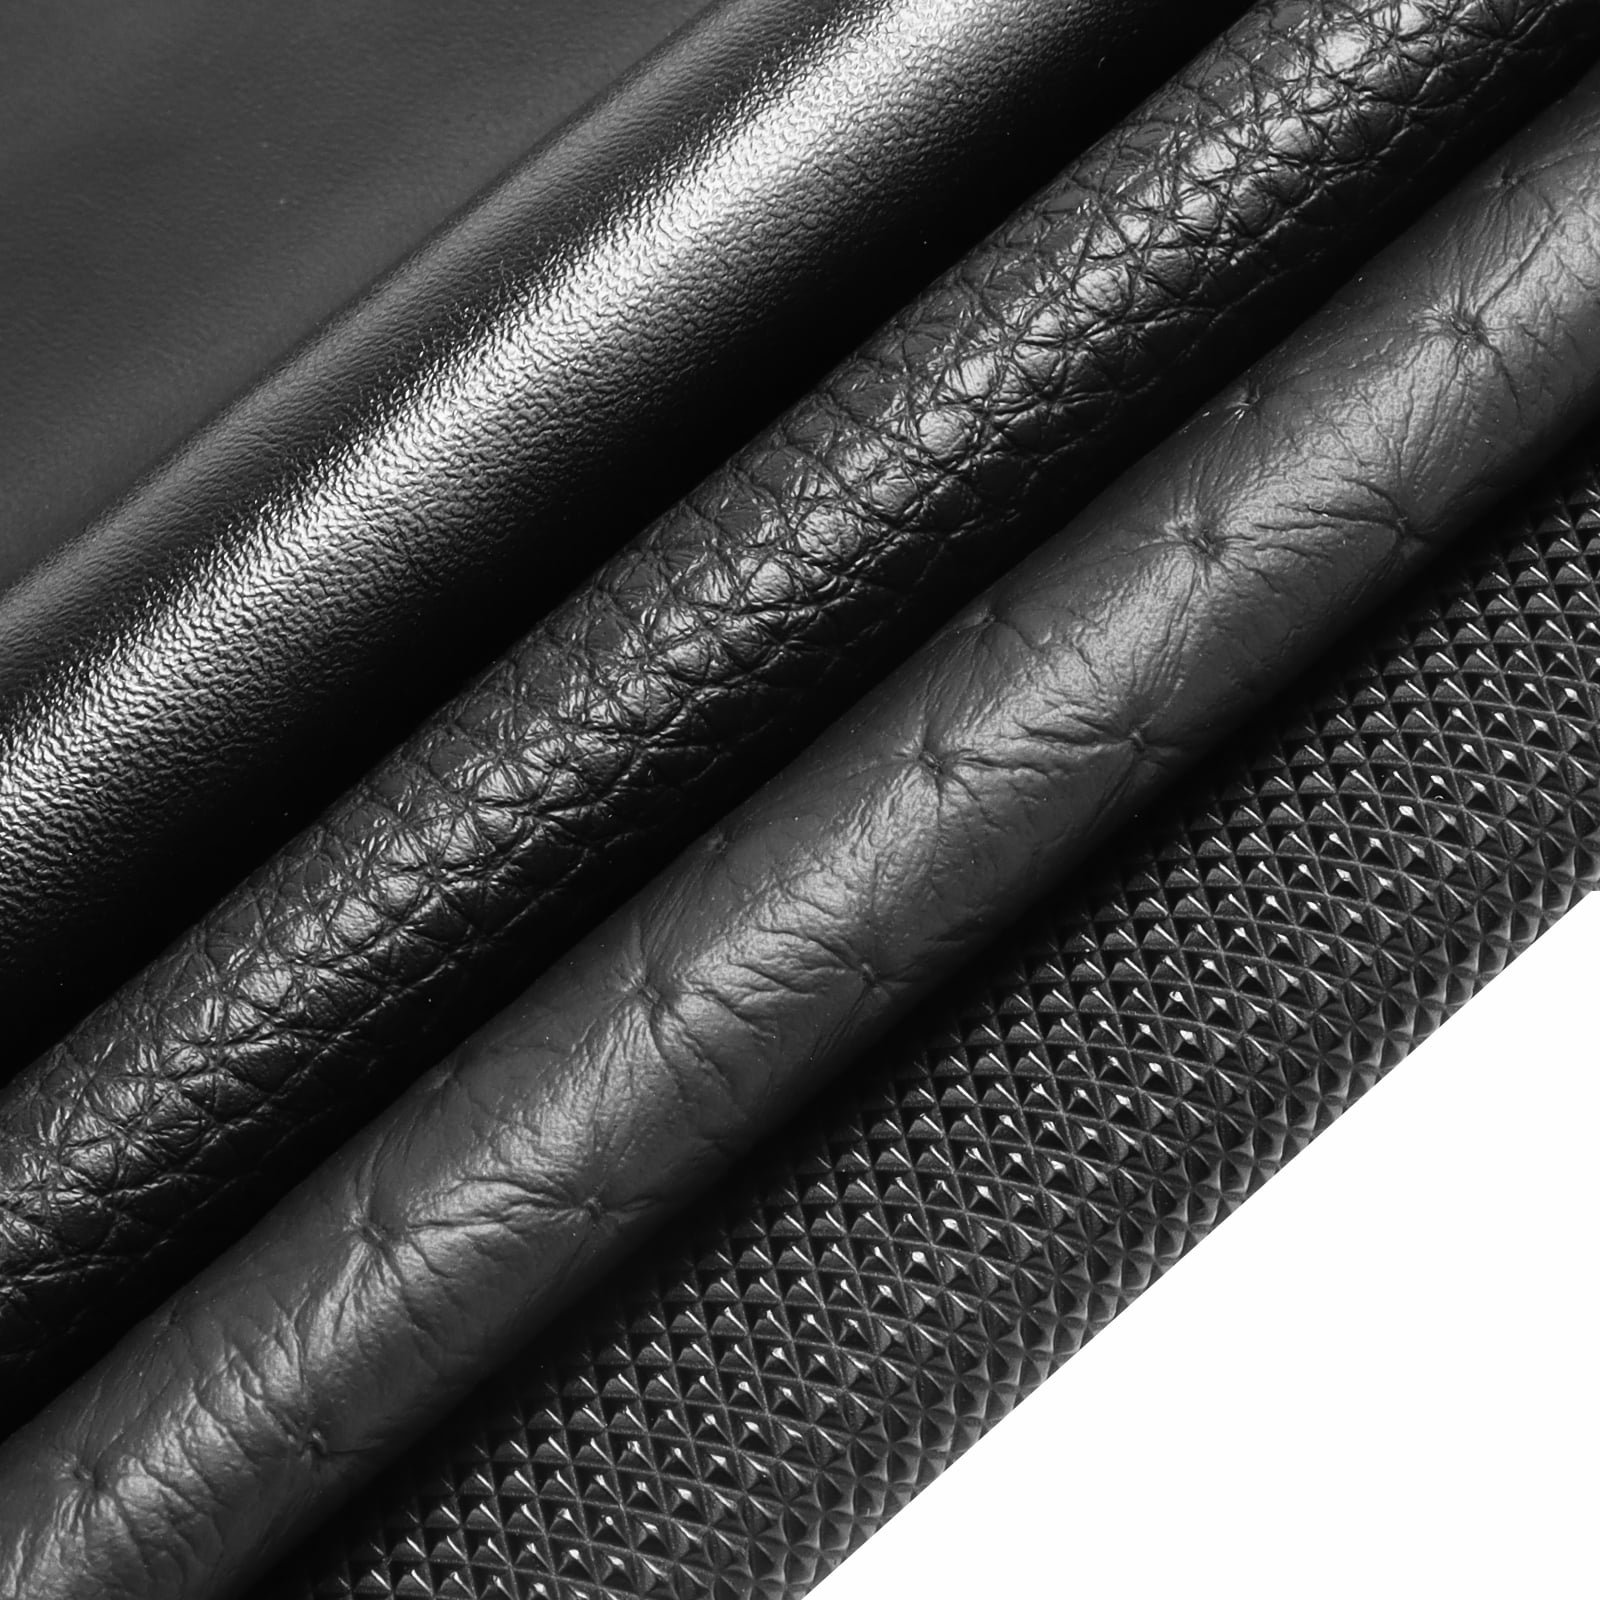 Car Elements Vinyl Marine Synthetic Leather Fabric Diamond Pattern Faux Leather Sheets for Upholstery,Most Boats, Cars and Furniture, Size: 24 x 54, Black